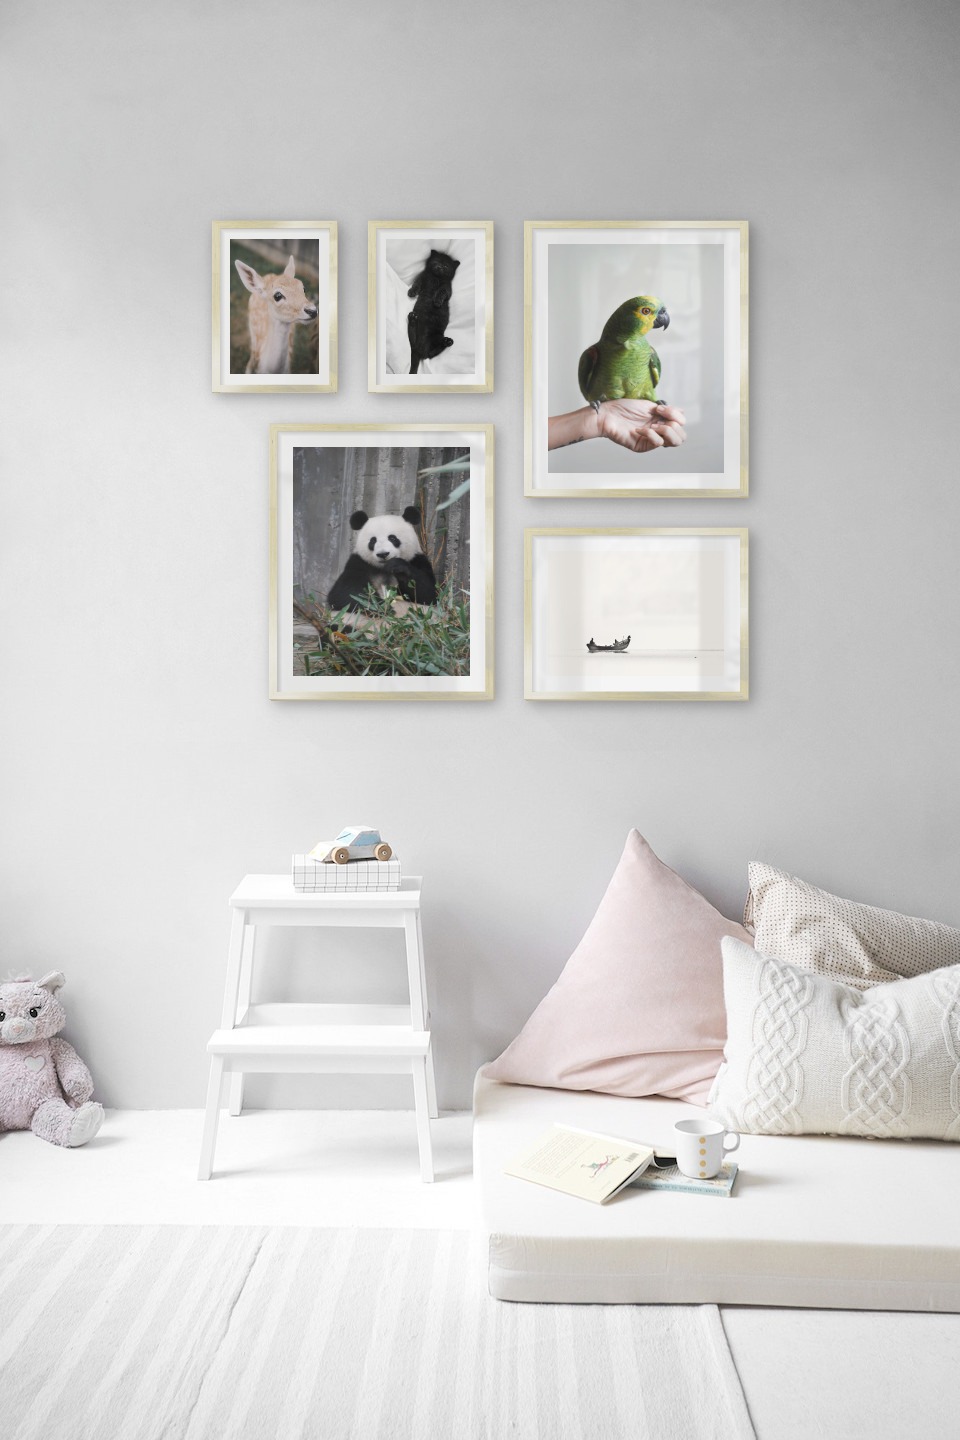 Gallery wall with picture frames in gold in sizes 21x30, 40x50 and 30x40 with prints "Cat in bed", "Deer", "Panda", "Green parrot" and "People in boat"